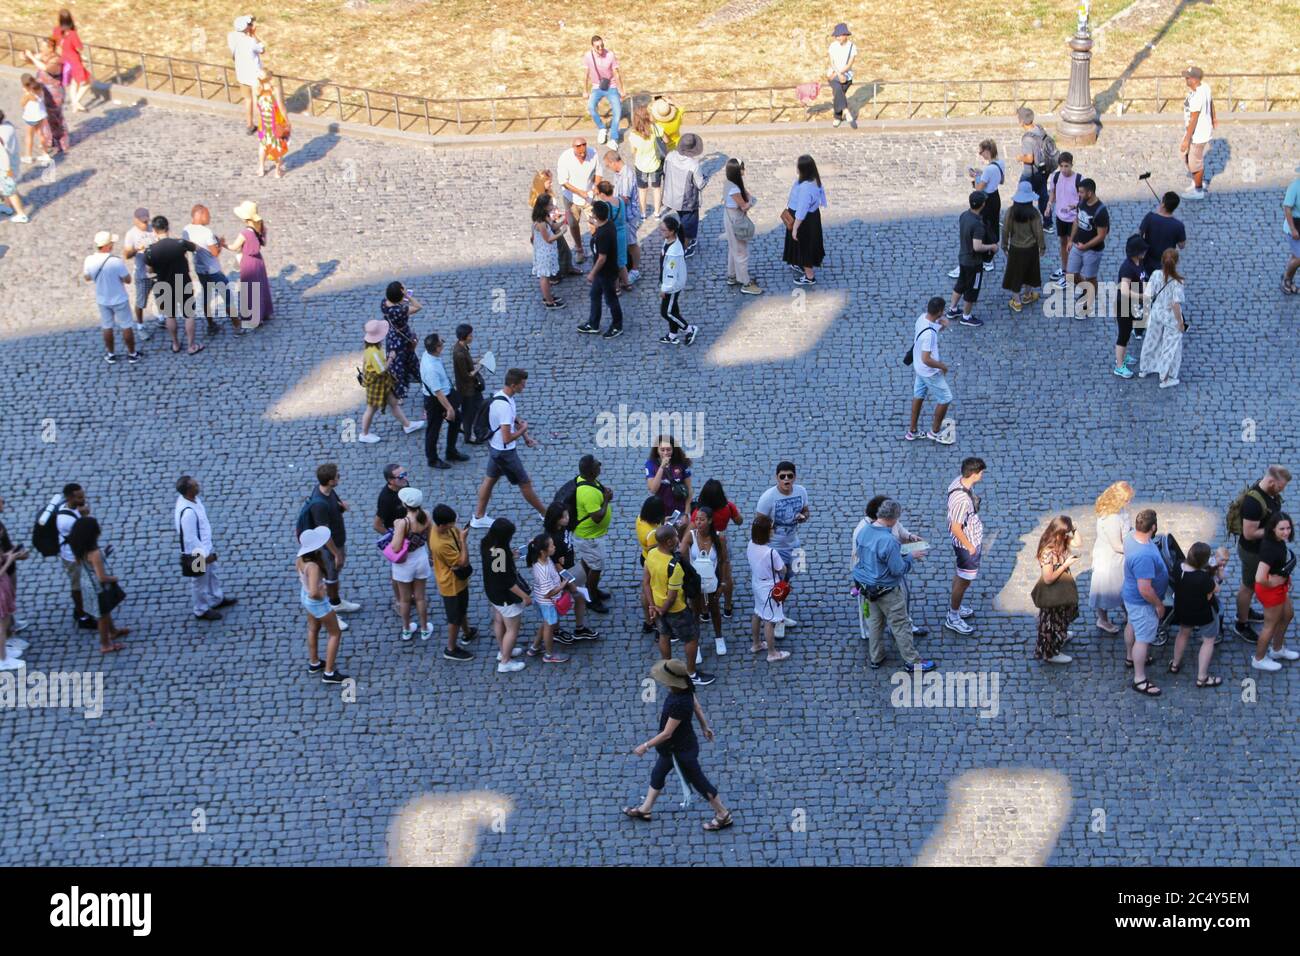 Colloseum, Rome, Italy 18 july 2019 Waiting in line on a hot summer day to buy tickets to visit the Colloseum in Rome Italy Stock Photo